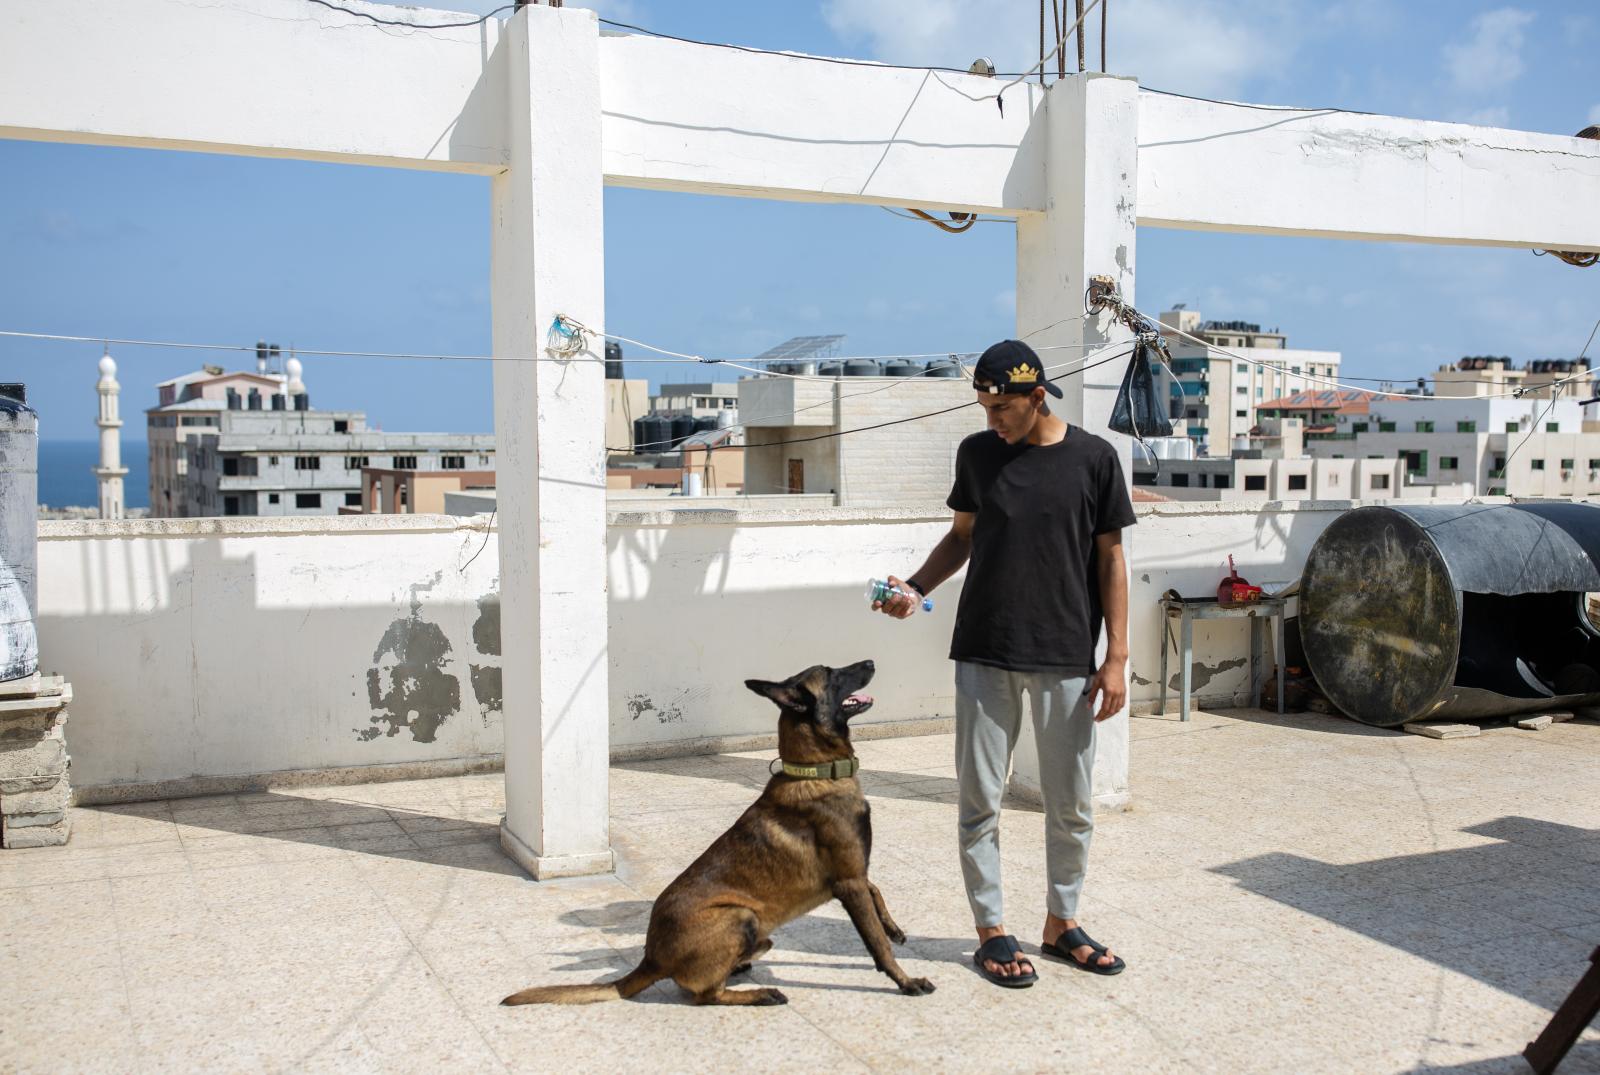 Mohammed and the Belgian Malinois